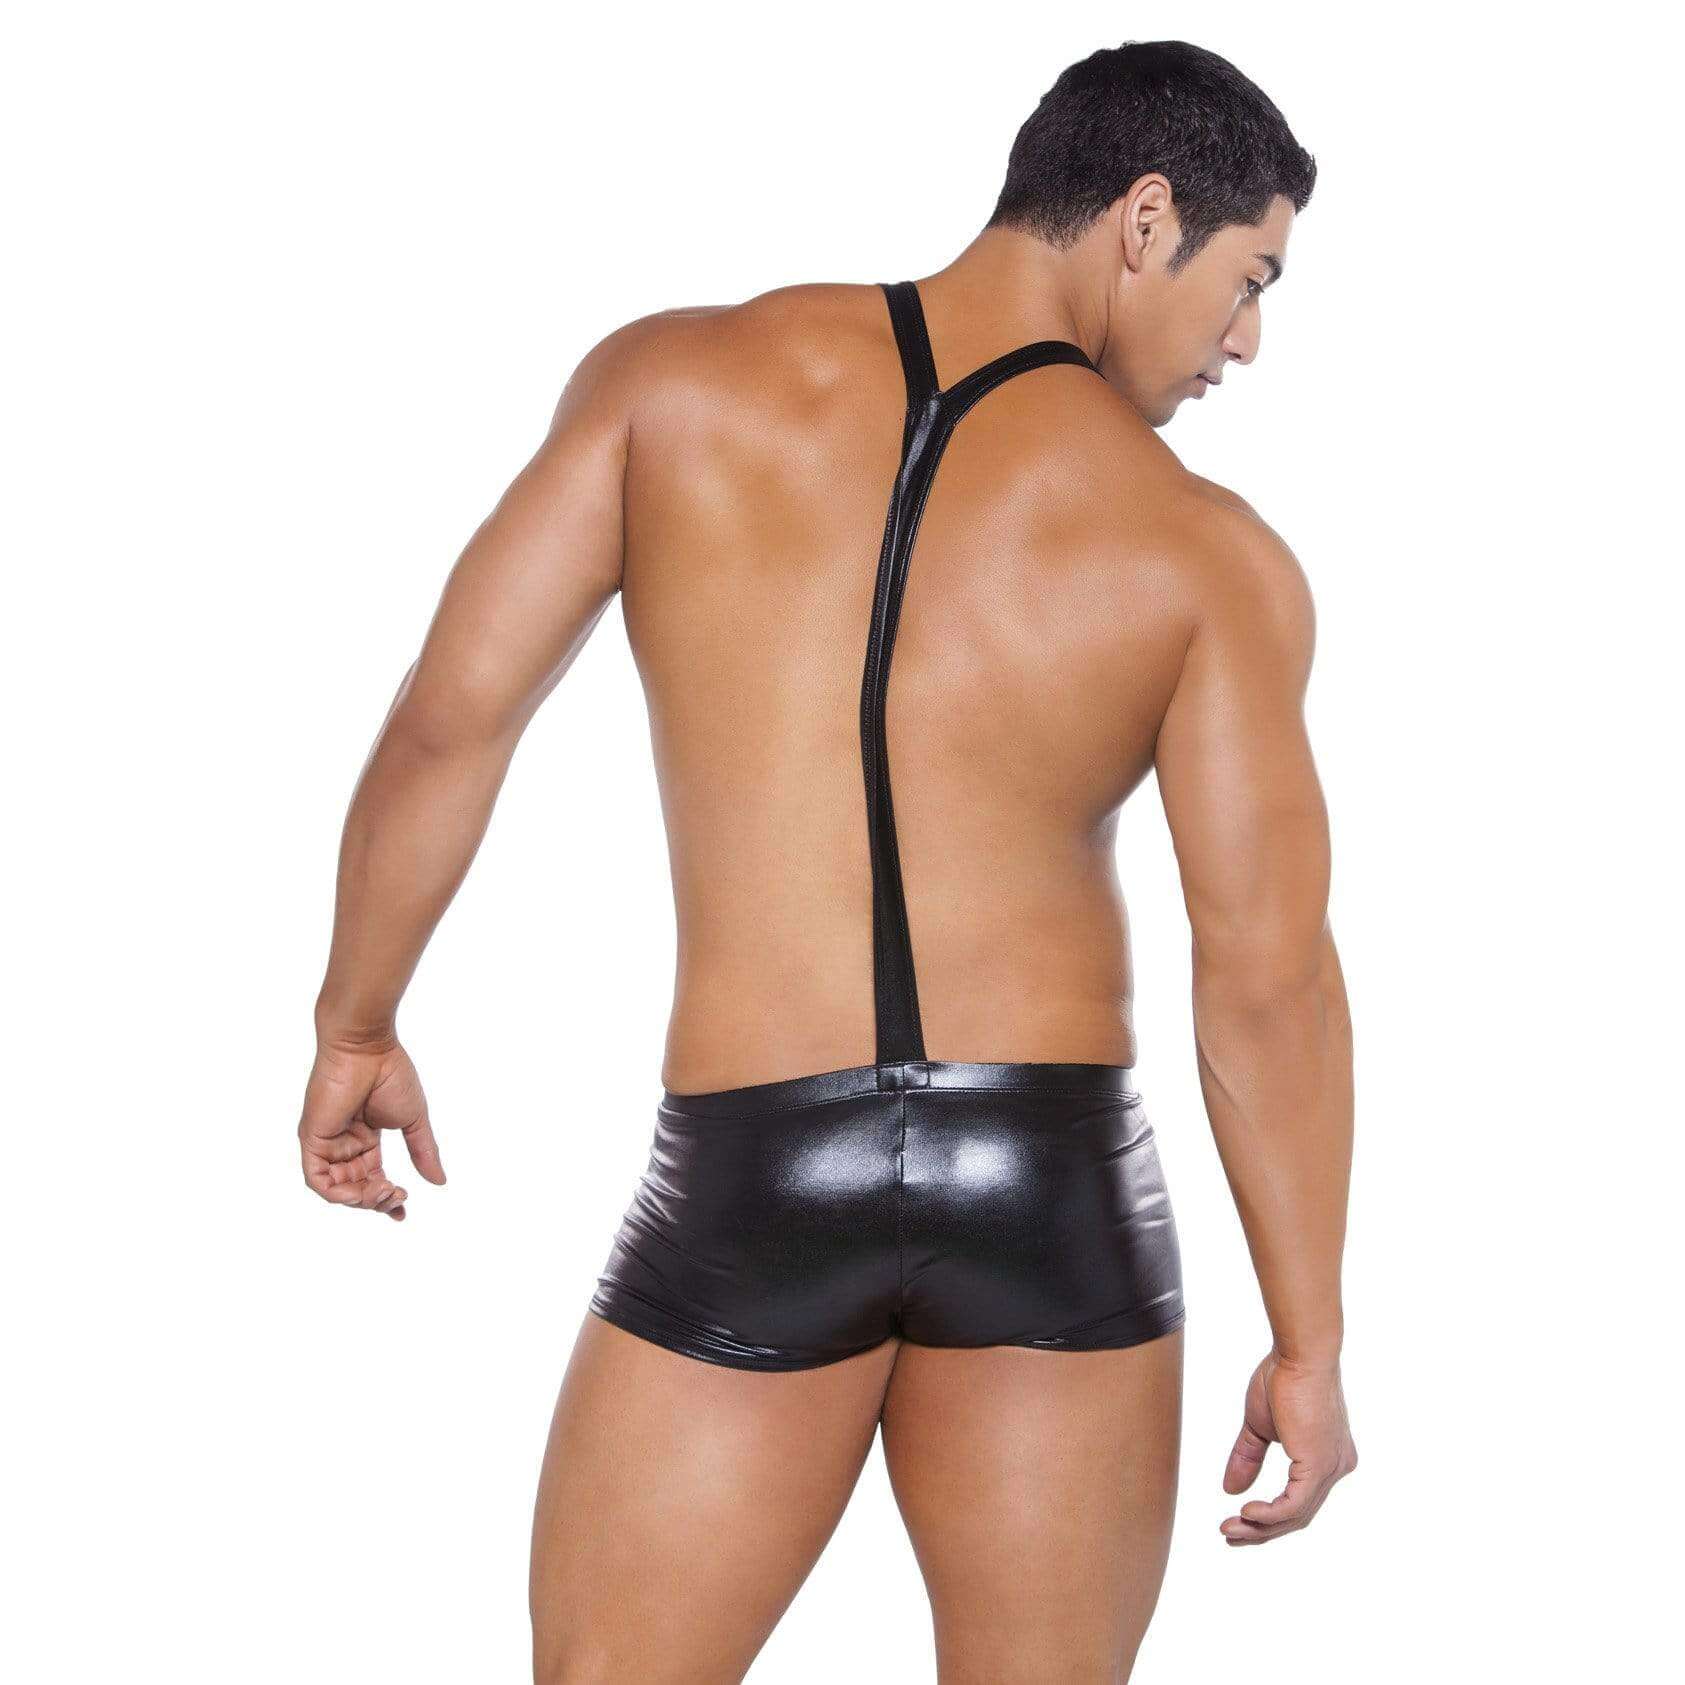 Zeus Wet Look Suspender Shorts - Black, O/S - Thorn & Feather Sex Toy Canada